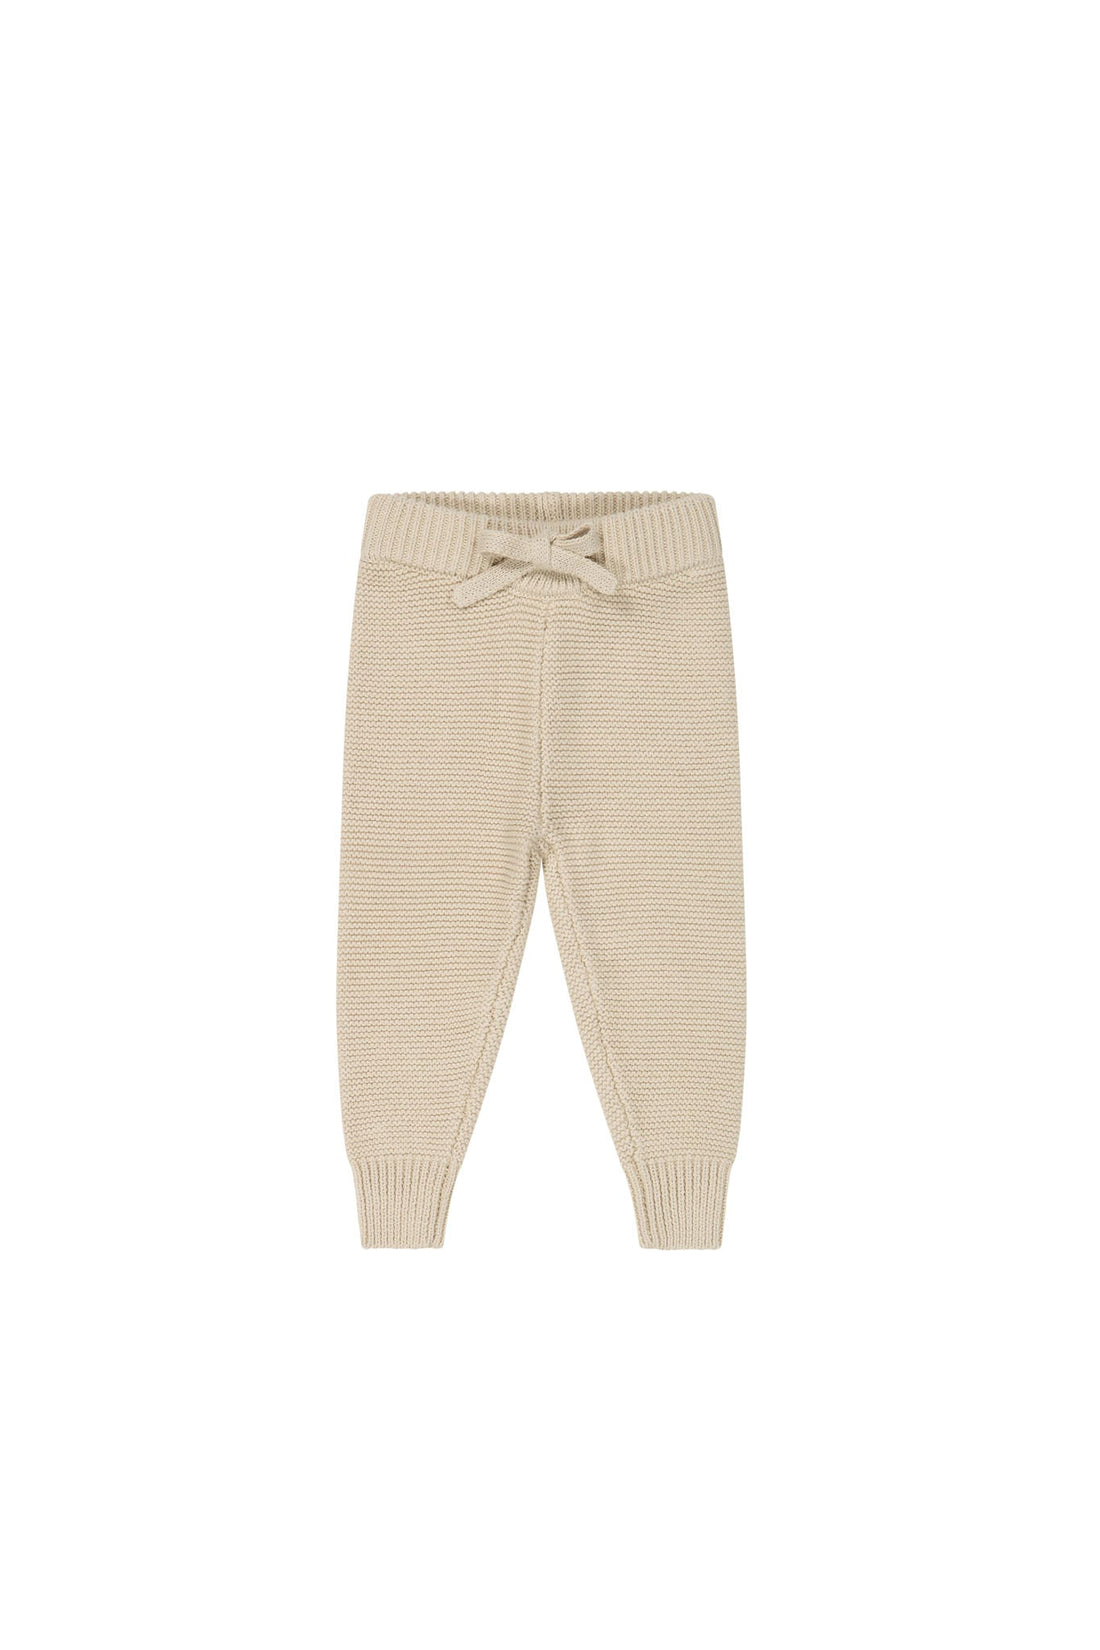 Ethan Pant - Sesame Childrens Pant from Jamie Kay USA